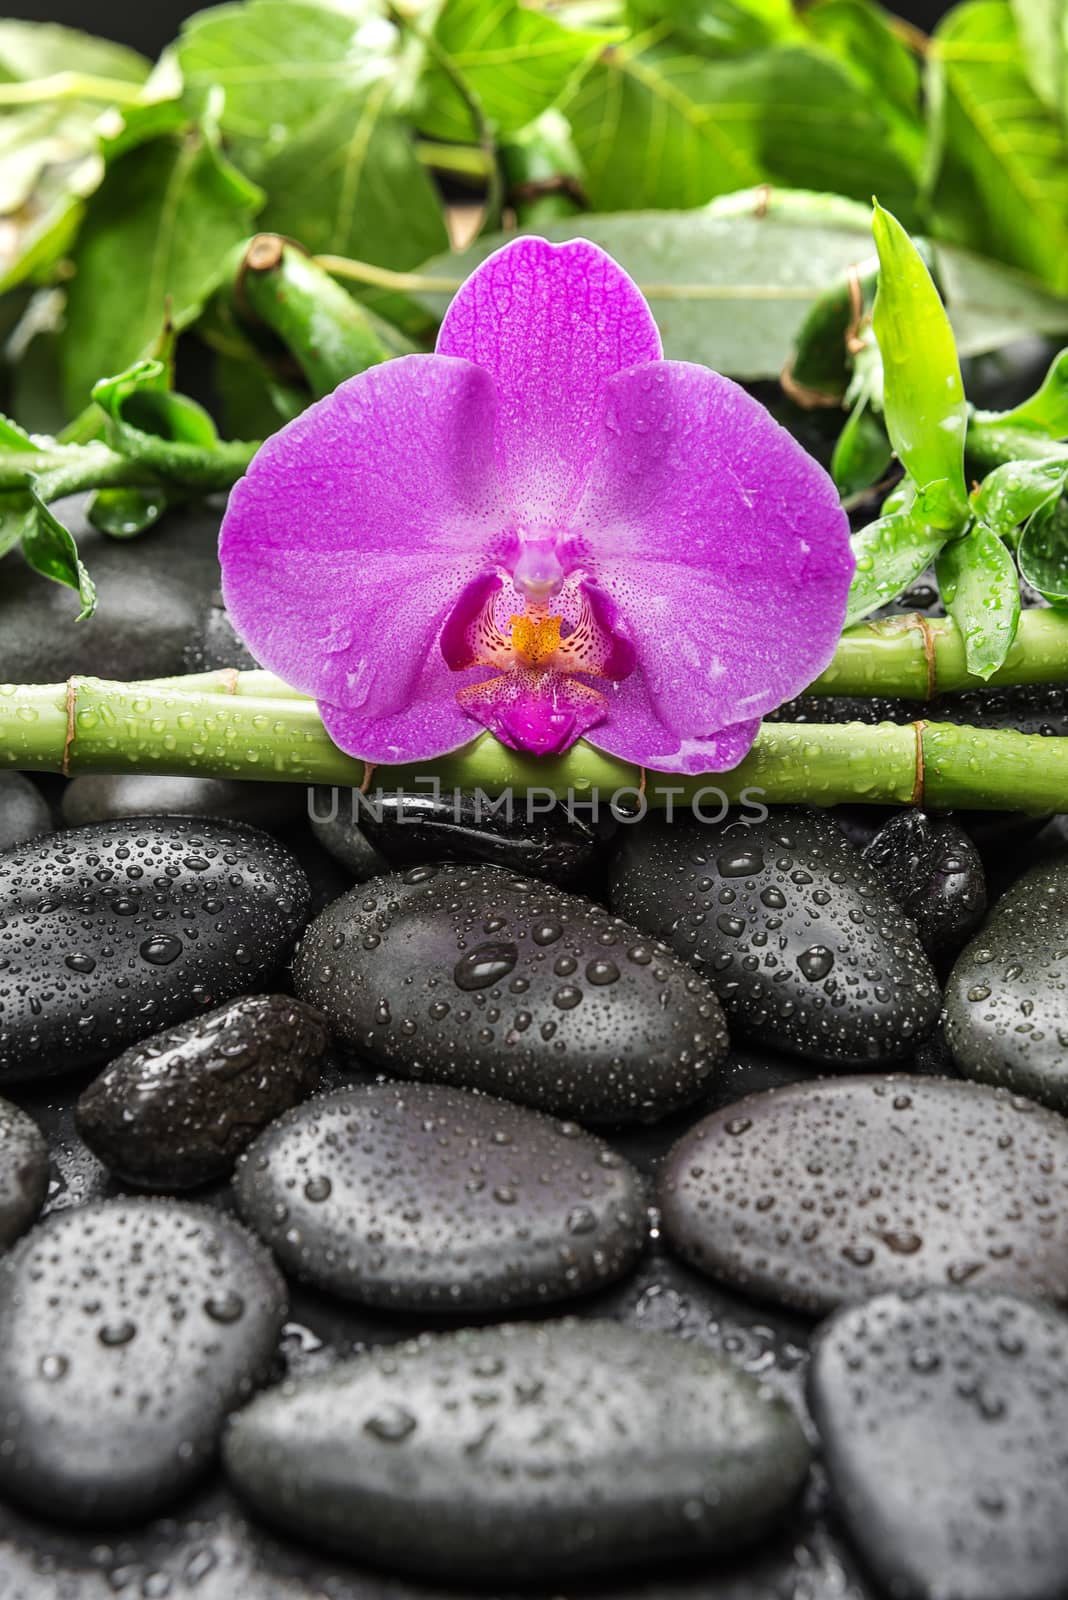 Spa concept with black basalt massage stones, pink orchid flower and lush green foliage covered with water drops on a black background